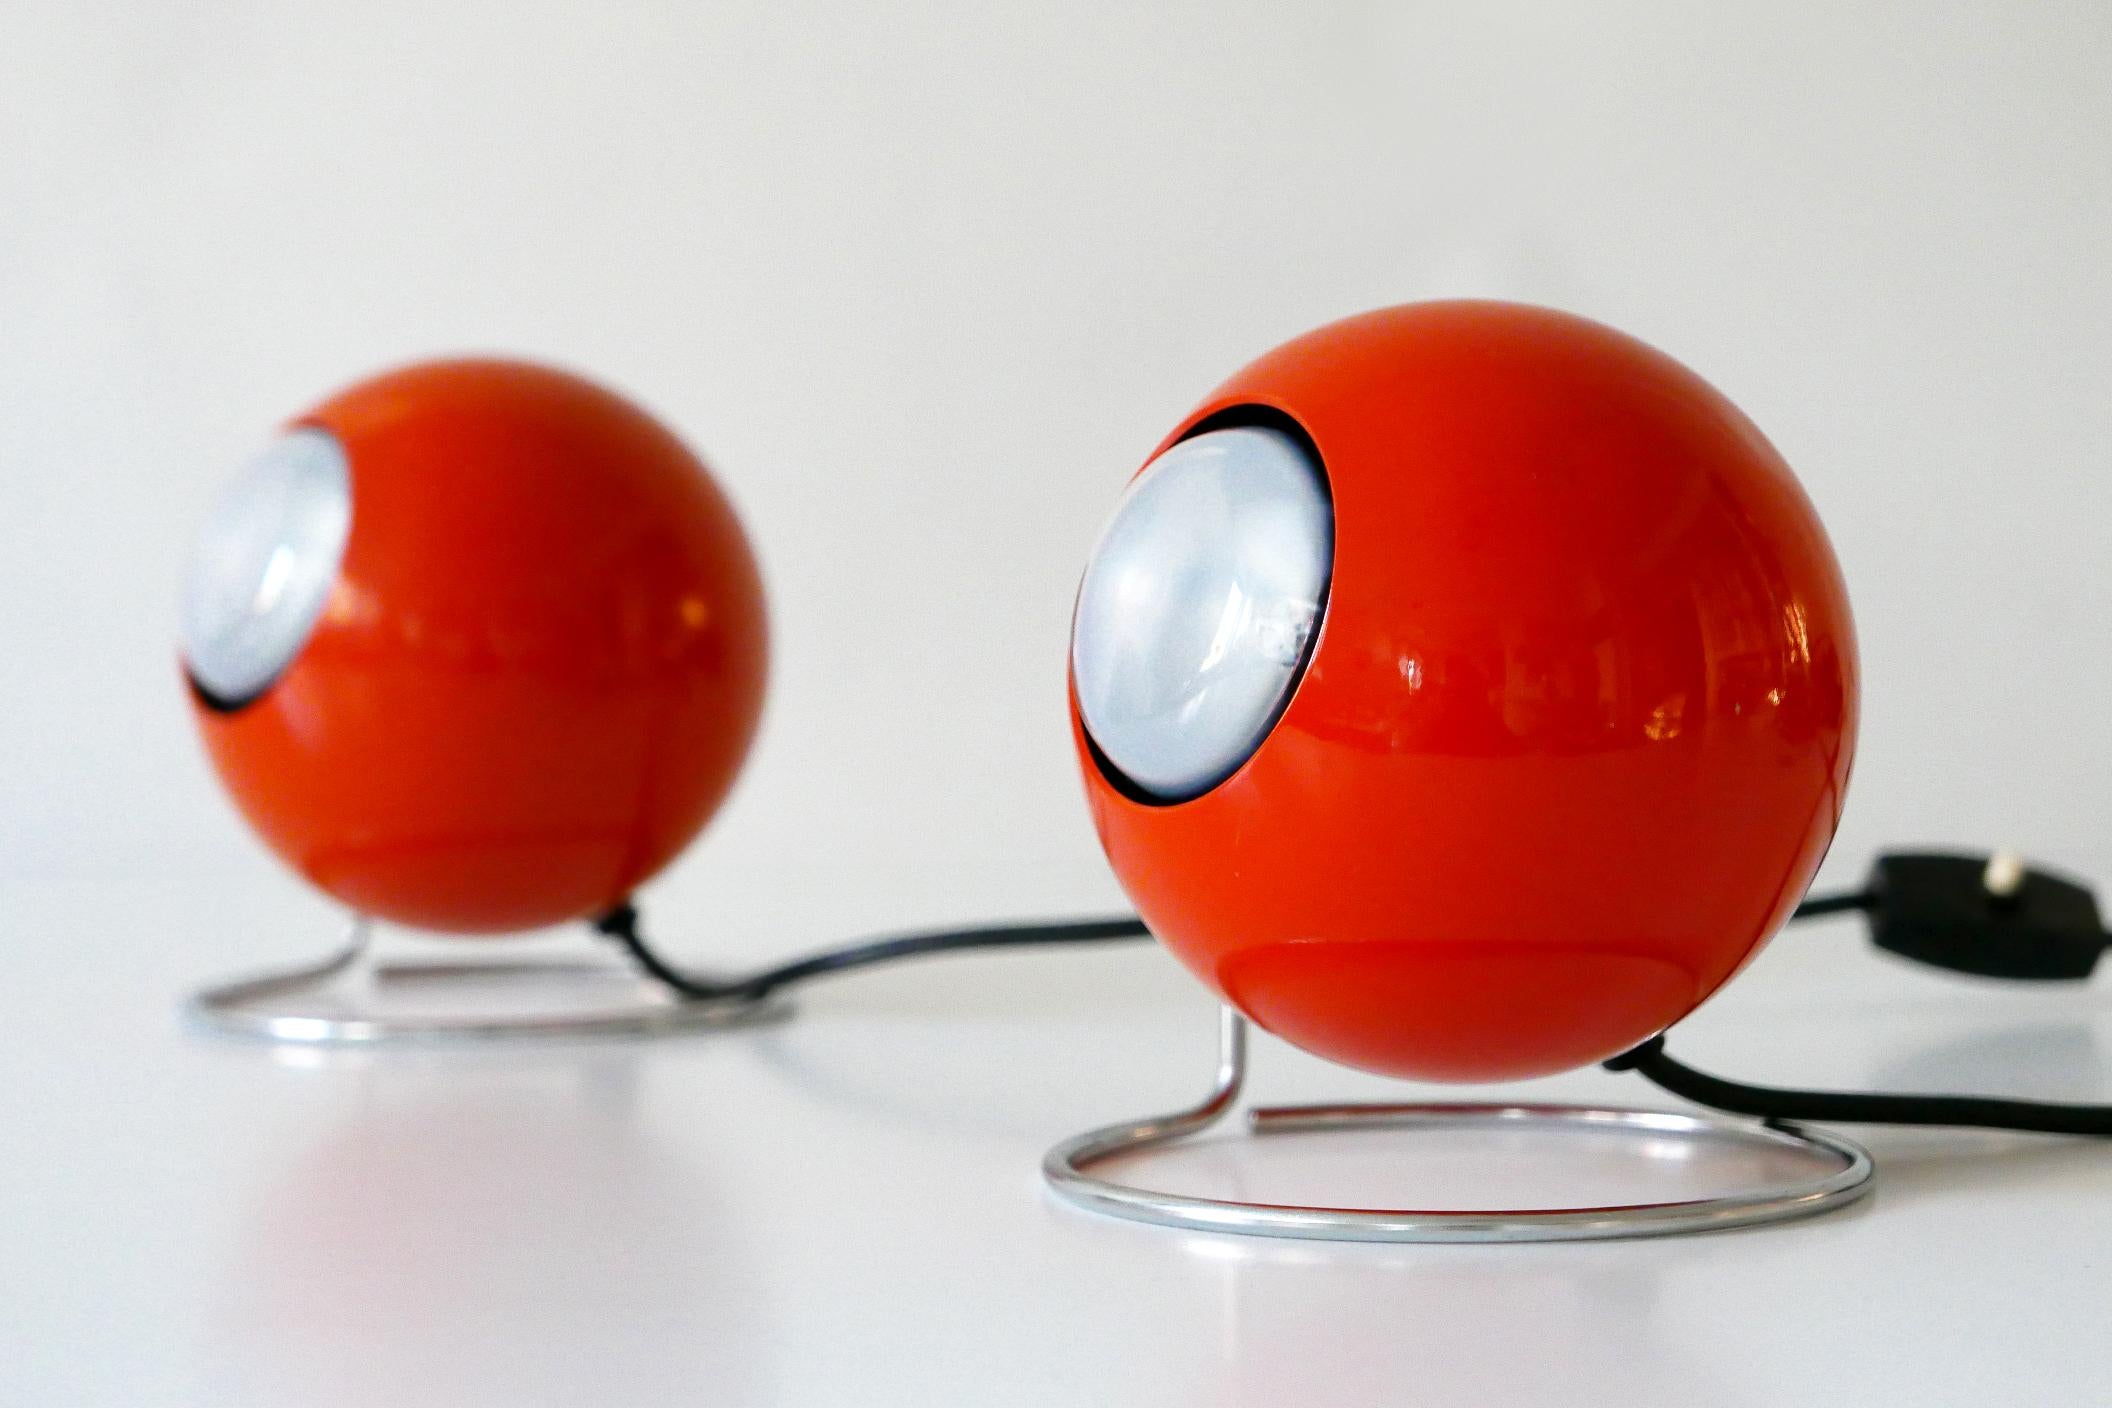 Mid-20th Century Set of Two Mid-Century Modern Metal 'Eye' Table Lamps, ERCO, 1960s-1970s Germany For Sale